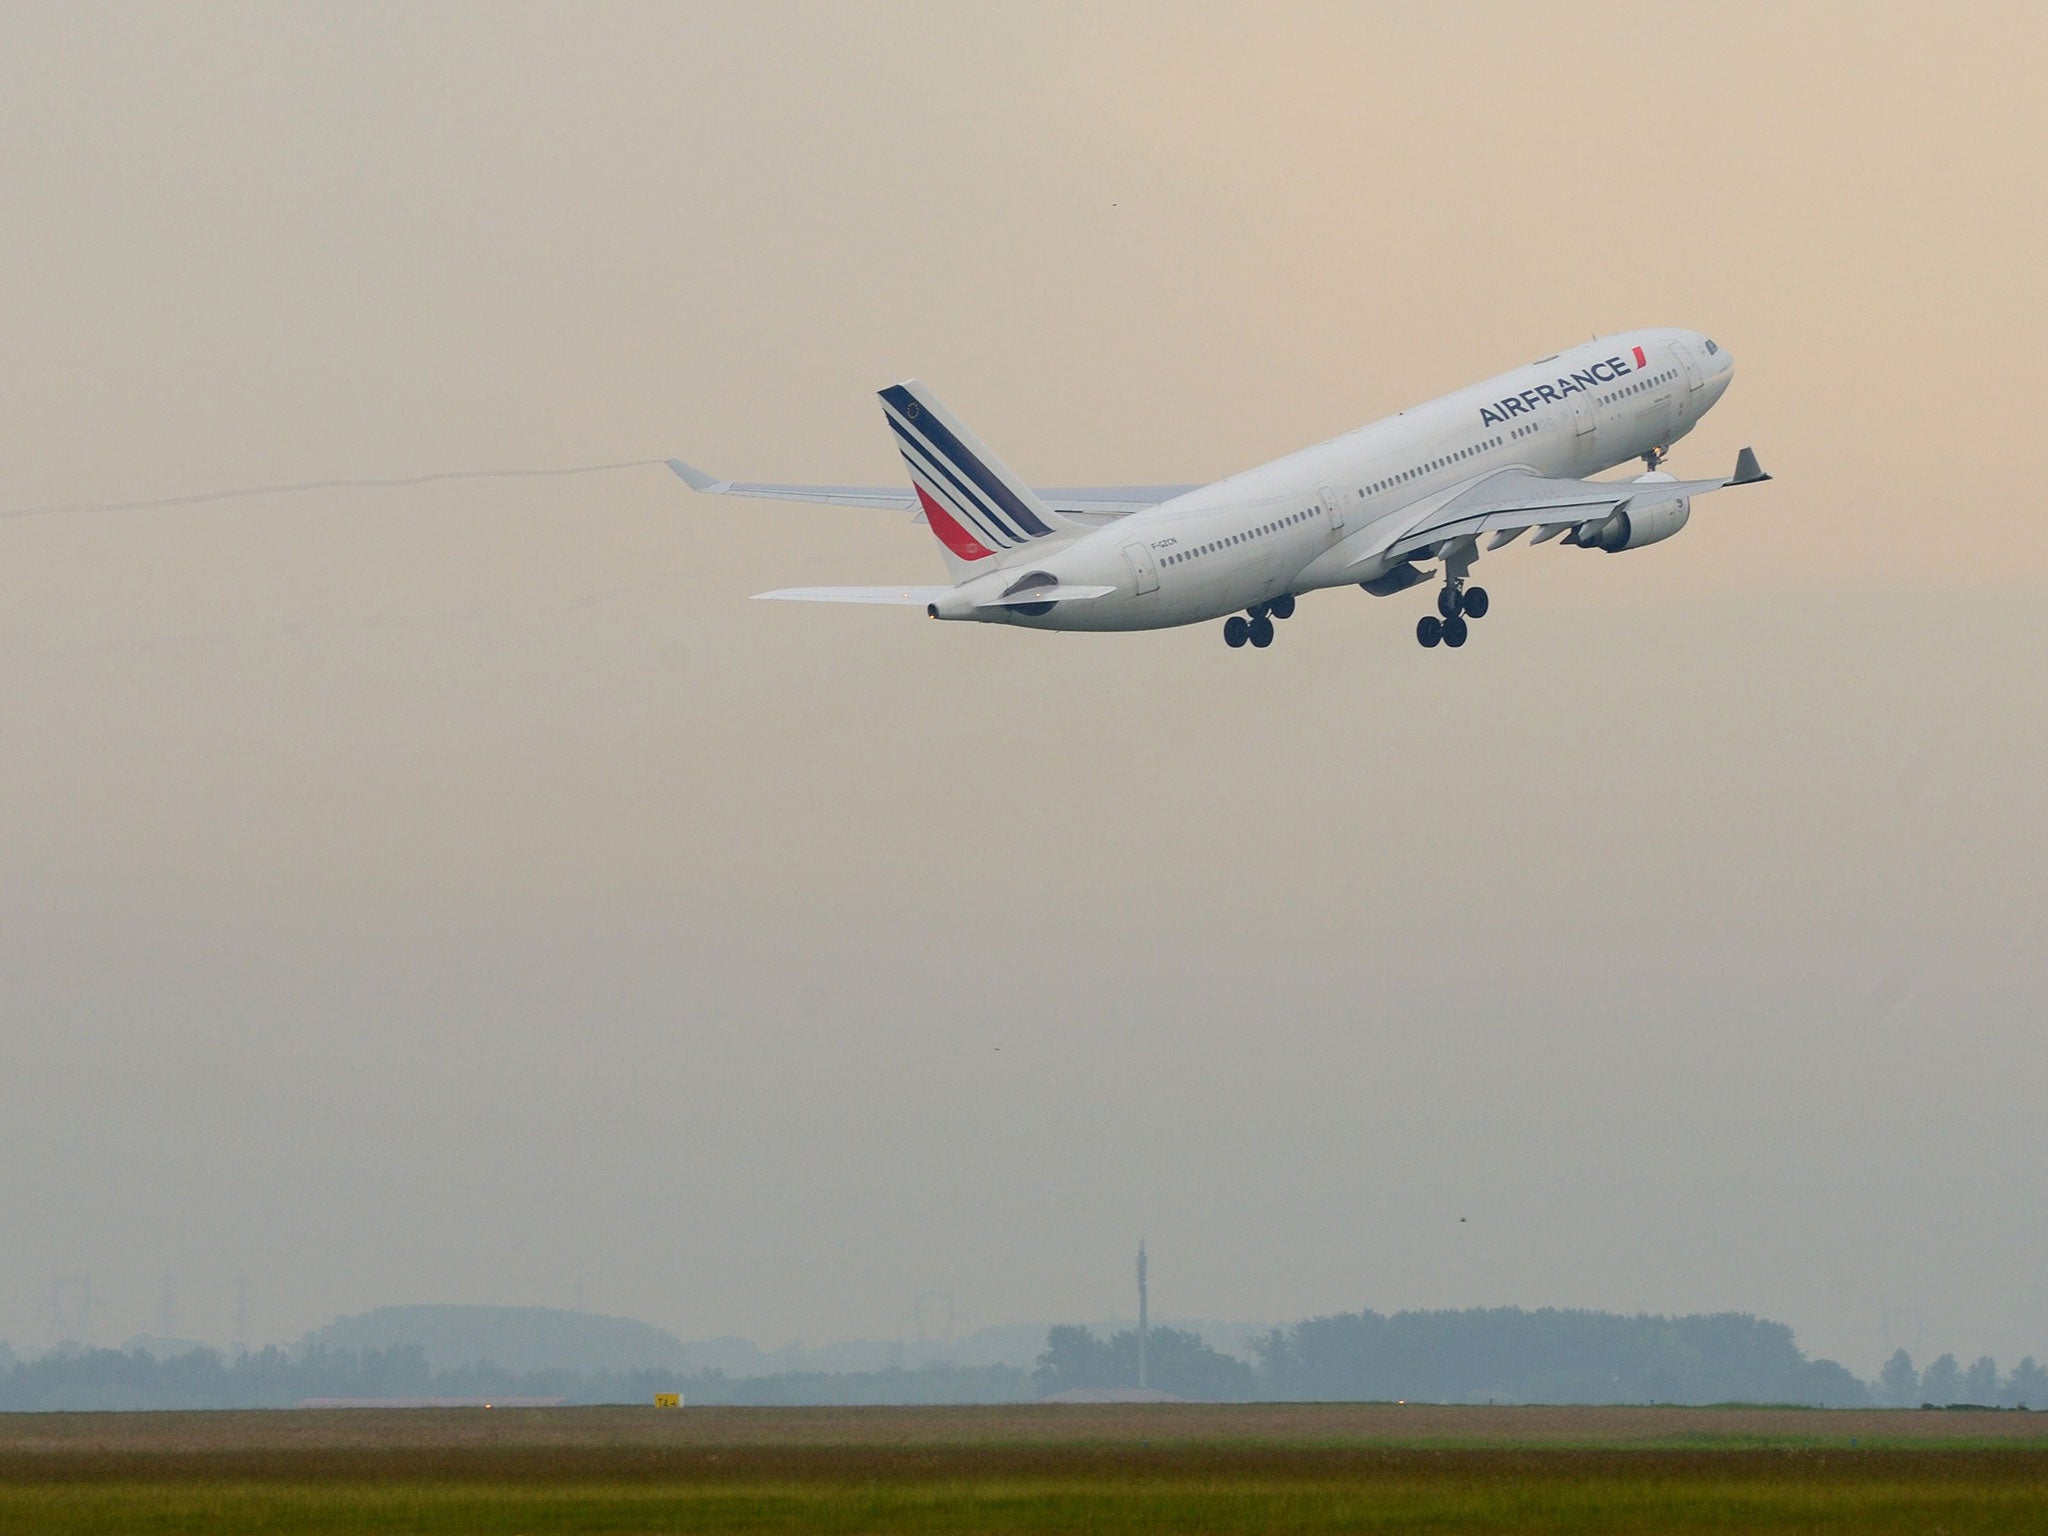 Air France is one of the airlines affected 